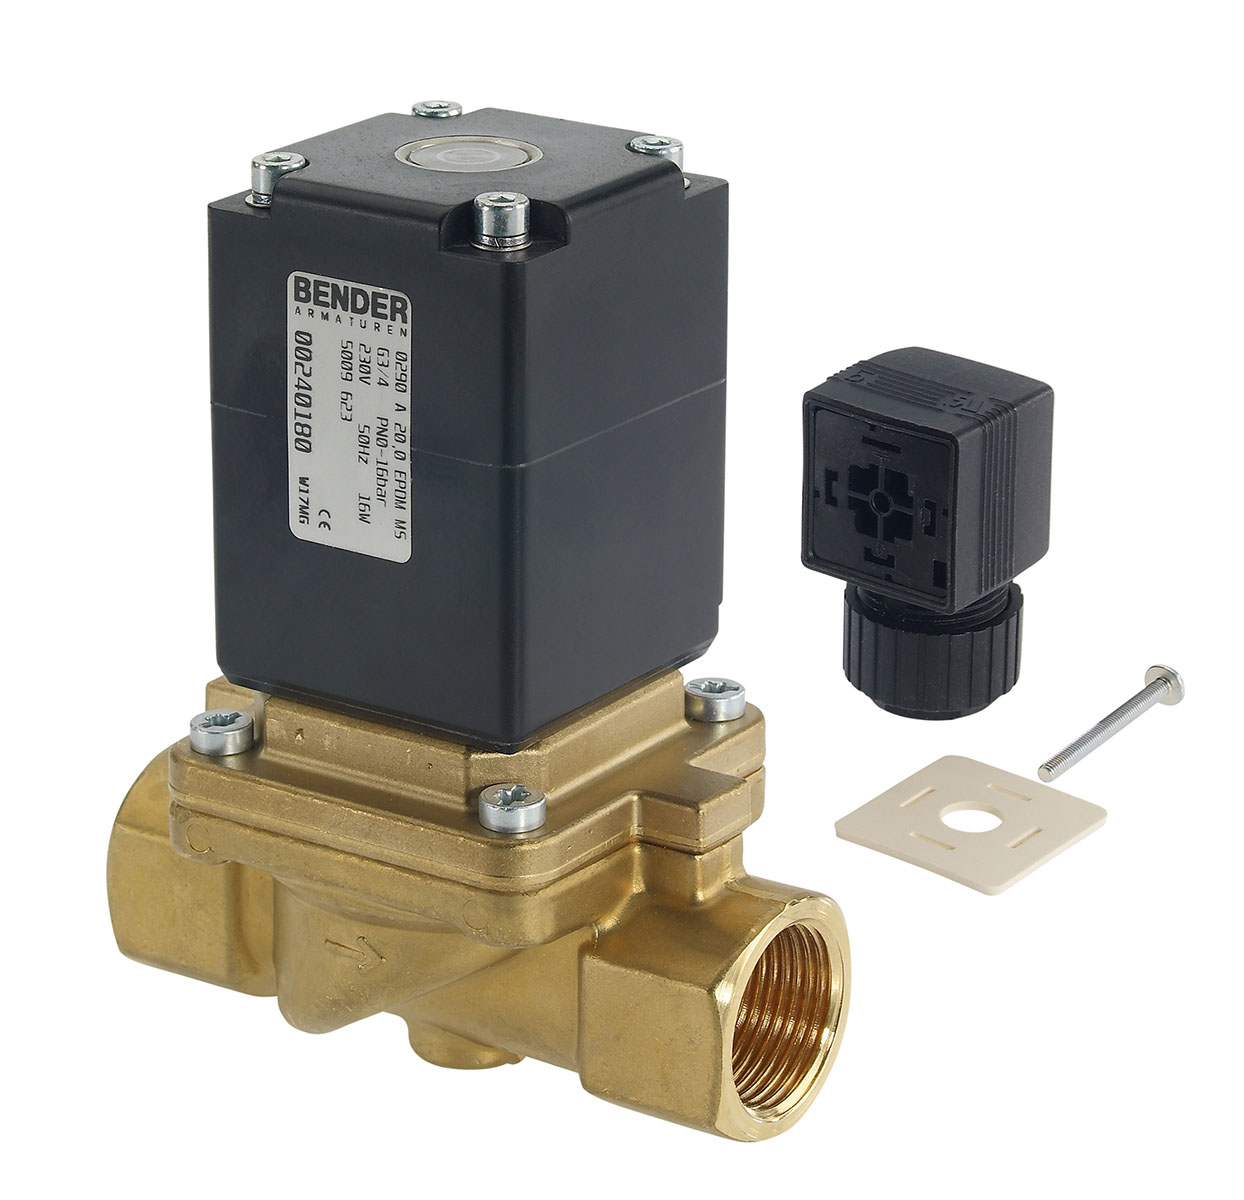 5009626 - 2/2 way solenoid valve normally closed for not flammable gas and fluids Type 6; female thread